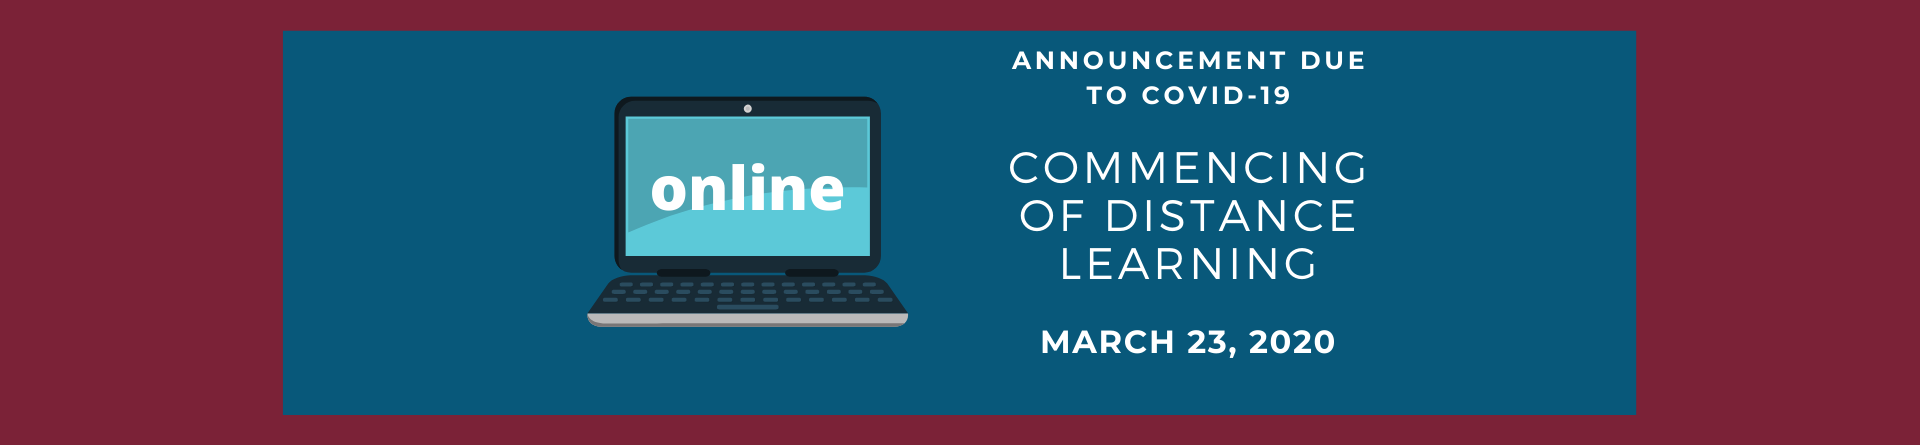 Distance learning lessons commence Monday, March 23rd 2020